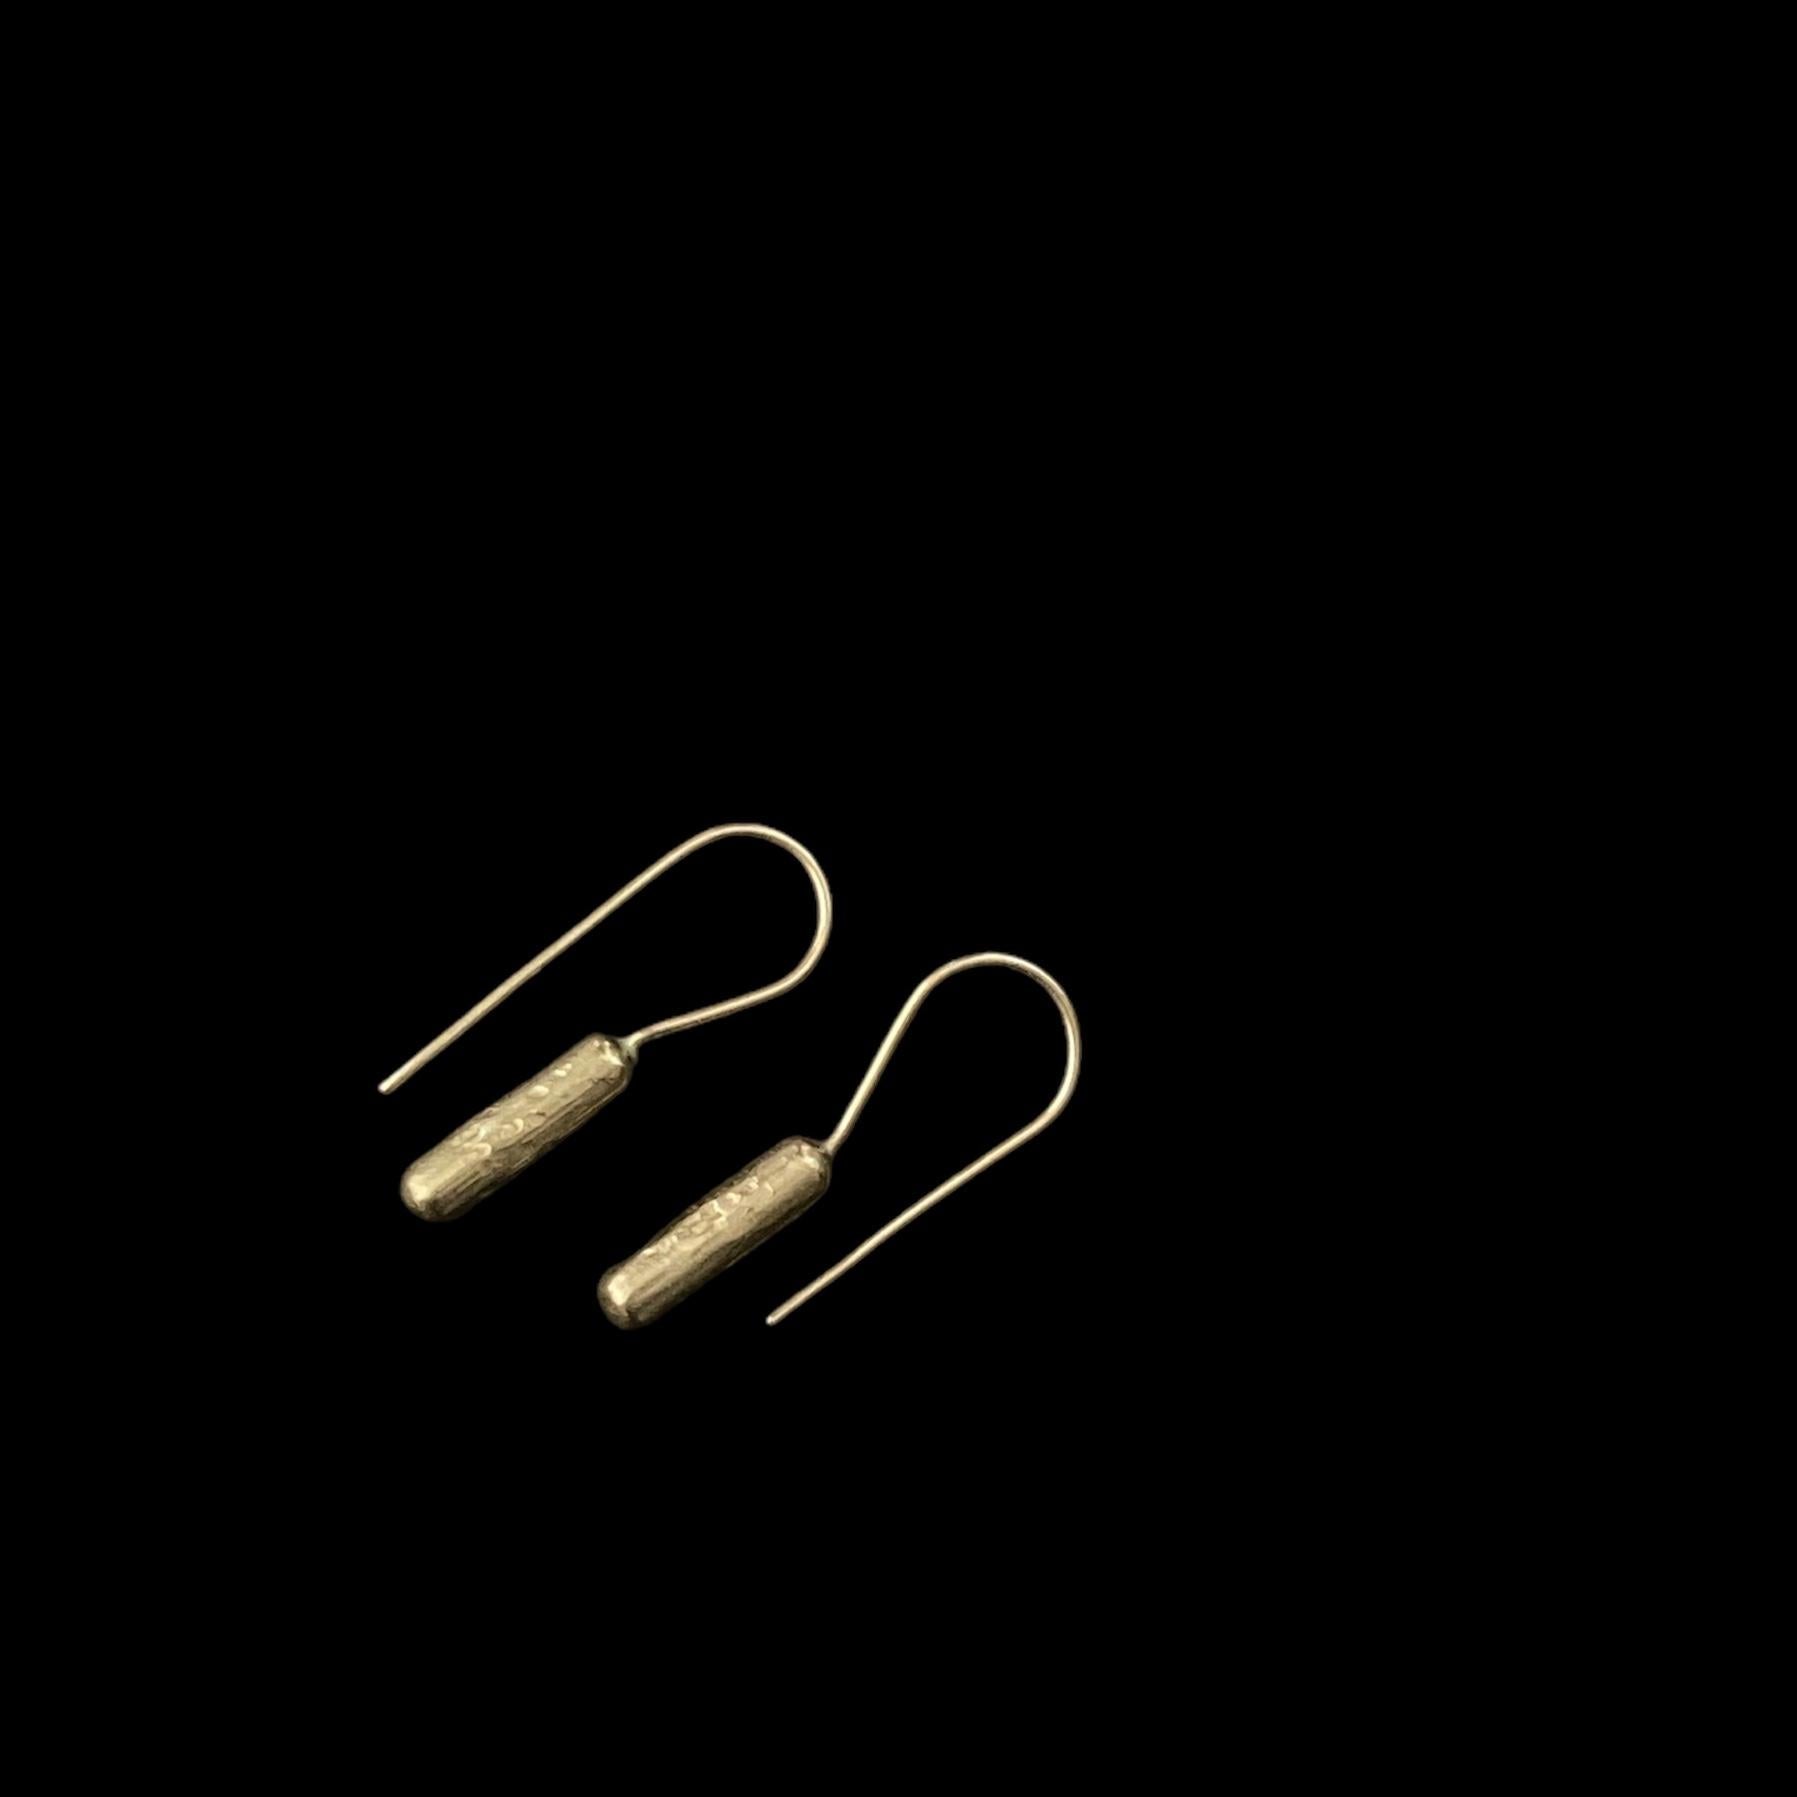 These earrings are elegantly shaped and perfect for everyday wear. 

They are fabricated from unocated golden brass, and the hook is made from gold filled wire. They are gently textured and are finished with a gentle, natural polish, to subtly catch